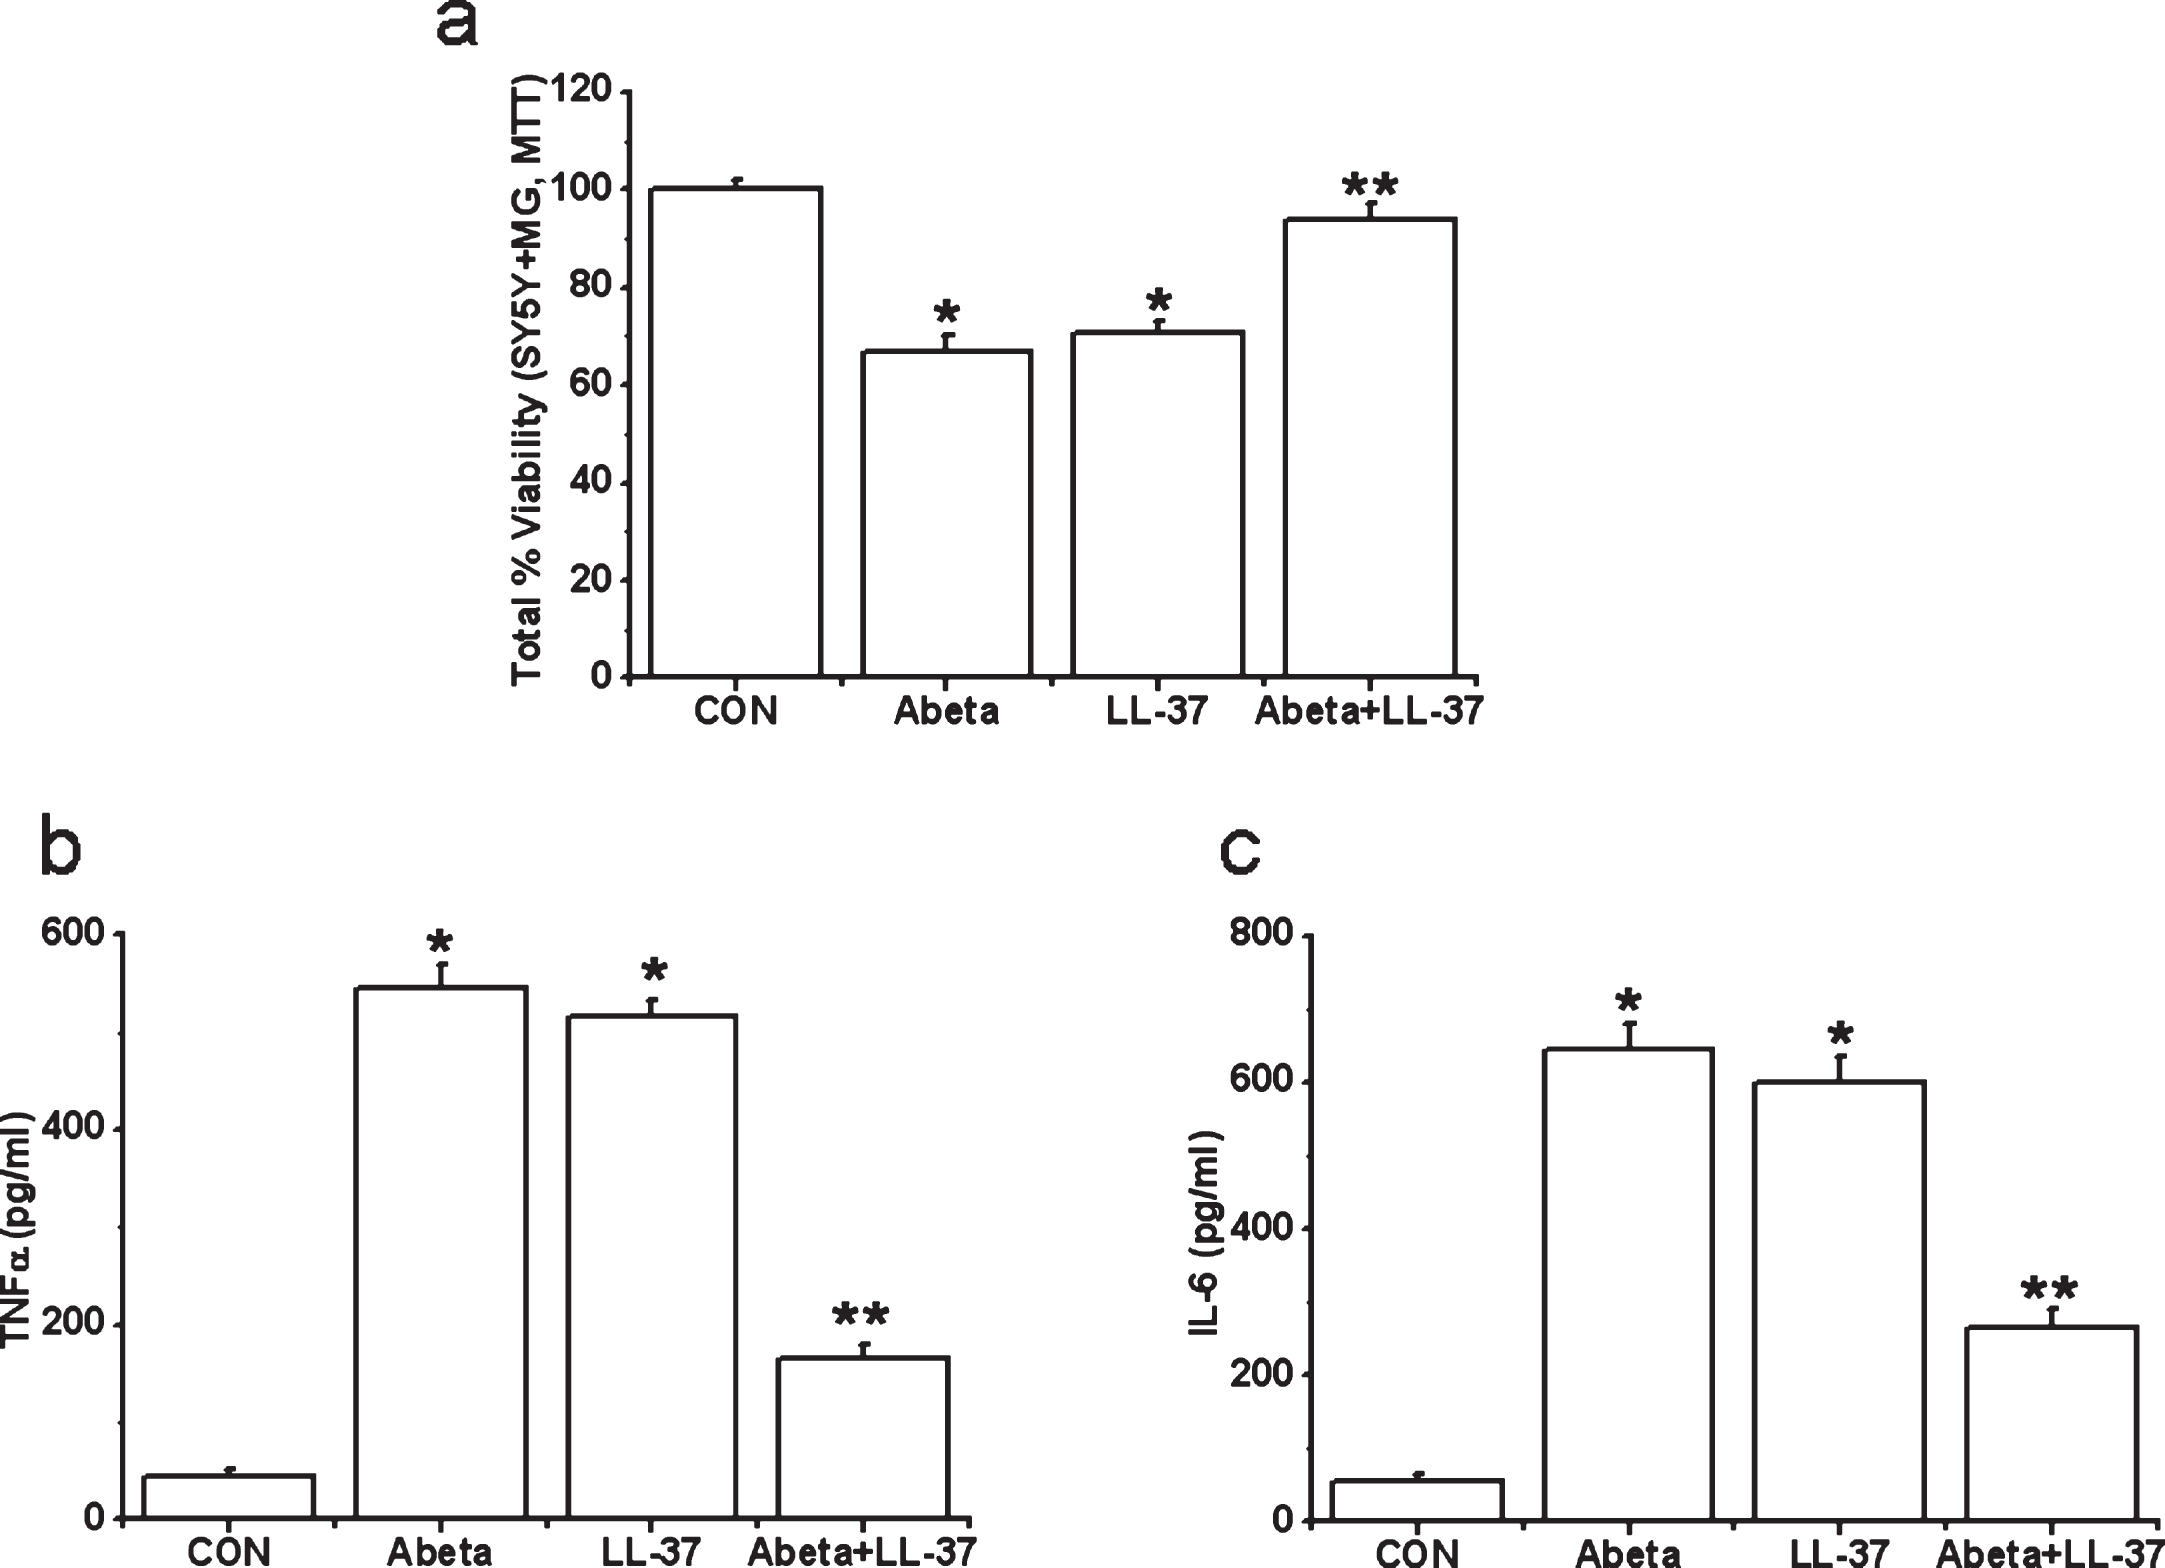 Effects of treatment with Aβ, LL-37, or their mixture on the viability changes of SH-SY5Y cells induced by microglial-mediated toxicity in 72 h (a) and levels of cytokines, TNFα (b) and IL-6 (c) in microglial toxic supernatant. Values are mean±SEM, n = 4. One-way ANOVA was carried out to test significance. Multiple group comparisons were followed by a post-hoc Bonferroni test where necessary. *p < 0.01 for Aβ-treated cells and LL-37-exposed cells compared with control (CON) group and **p < 0.01 for Aβ-LL-37-treated groups compared with Aβ-treated cells and LL-37-exposed cells. Note that Aβ and LL-37 inhibit the microglial activation of each other.